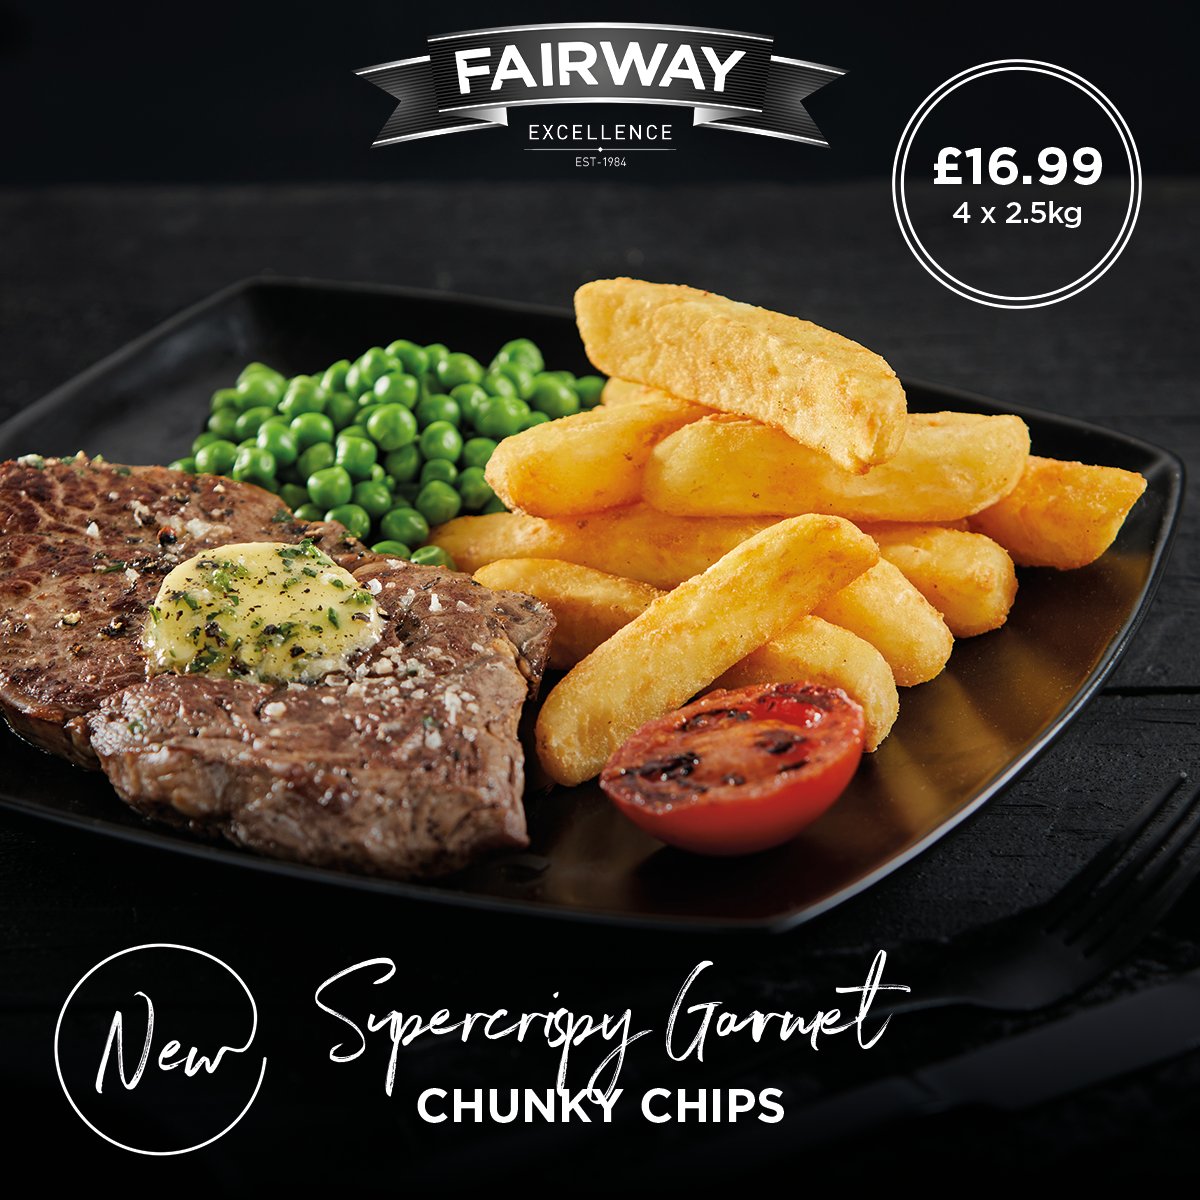 Introducing NEW #FairwayExcellence Supercrispy Gourmet Chunky Chips! Crispy outside, fluffy inside – a must-have for unforgettable dining. Vegan, gluten-free, and irresistible!

Where to buy 🛒 ow.ly/wlsM50RtEoh

#Foodservice #Hospitality #Catering #Chef